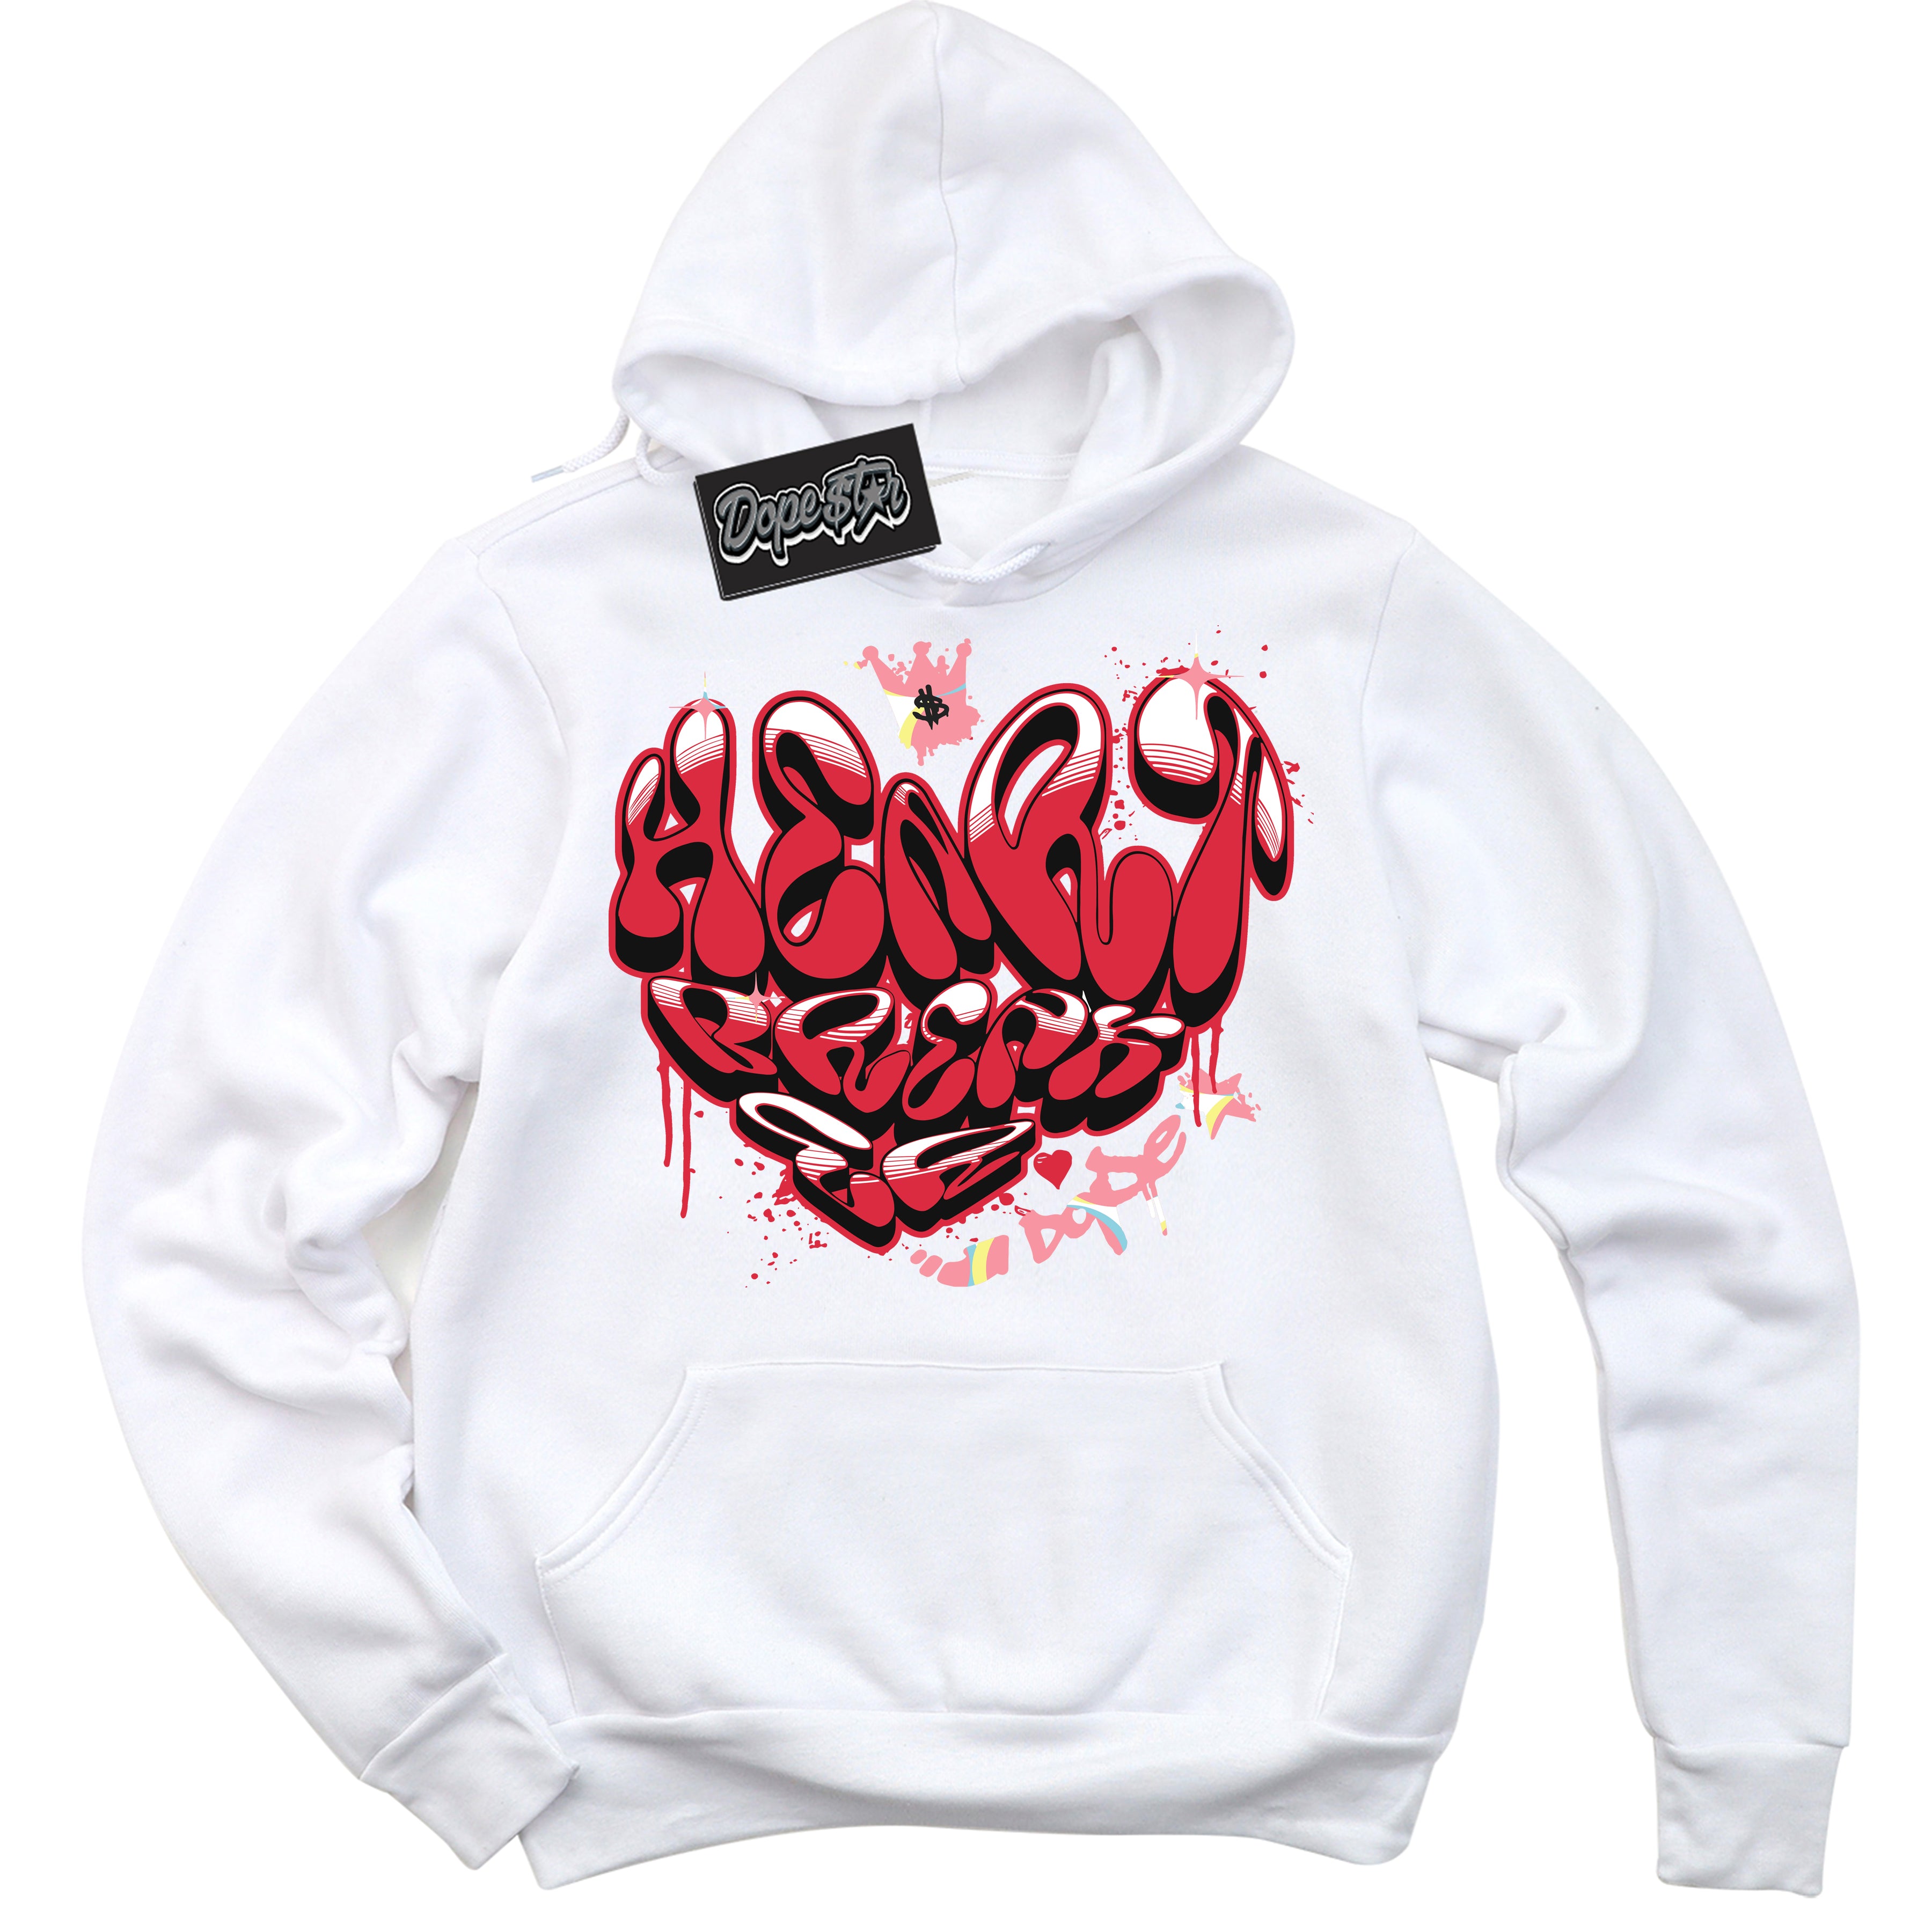 Cool White Graphic DopeStar Hoodie with “ Heartbreaker Graffiti “ print, that perfectly matches Spider-Verse 1s sneakers